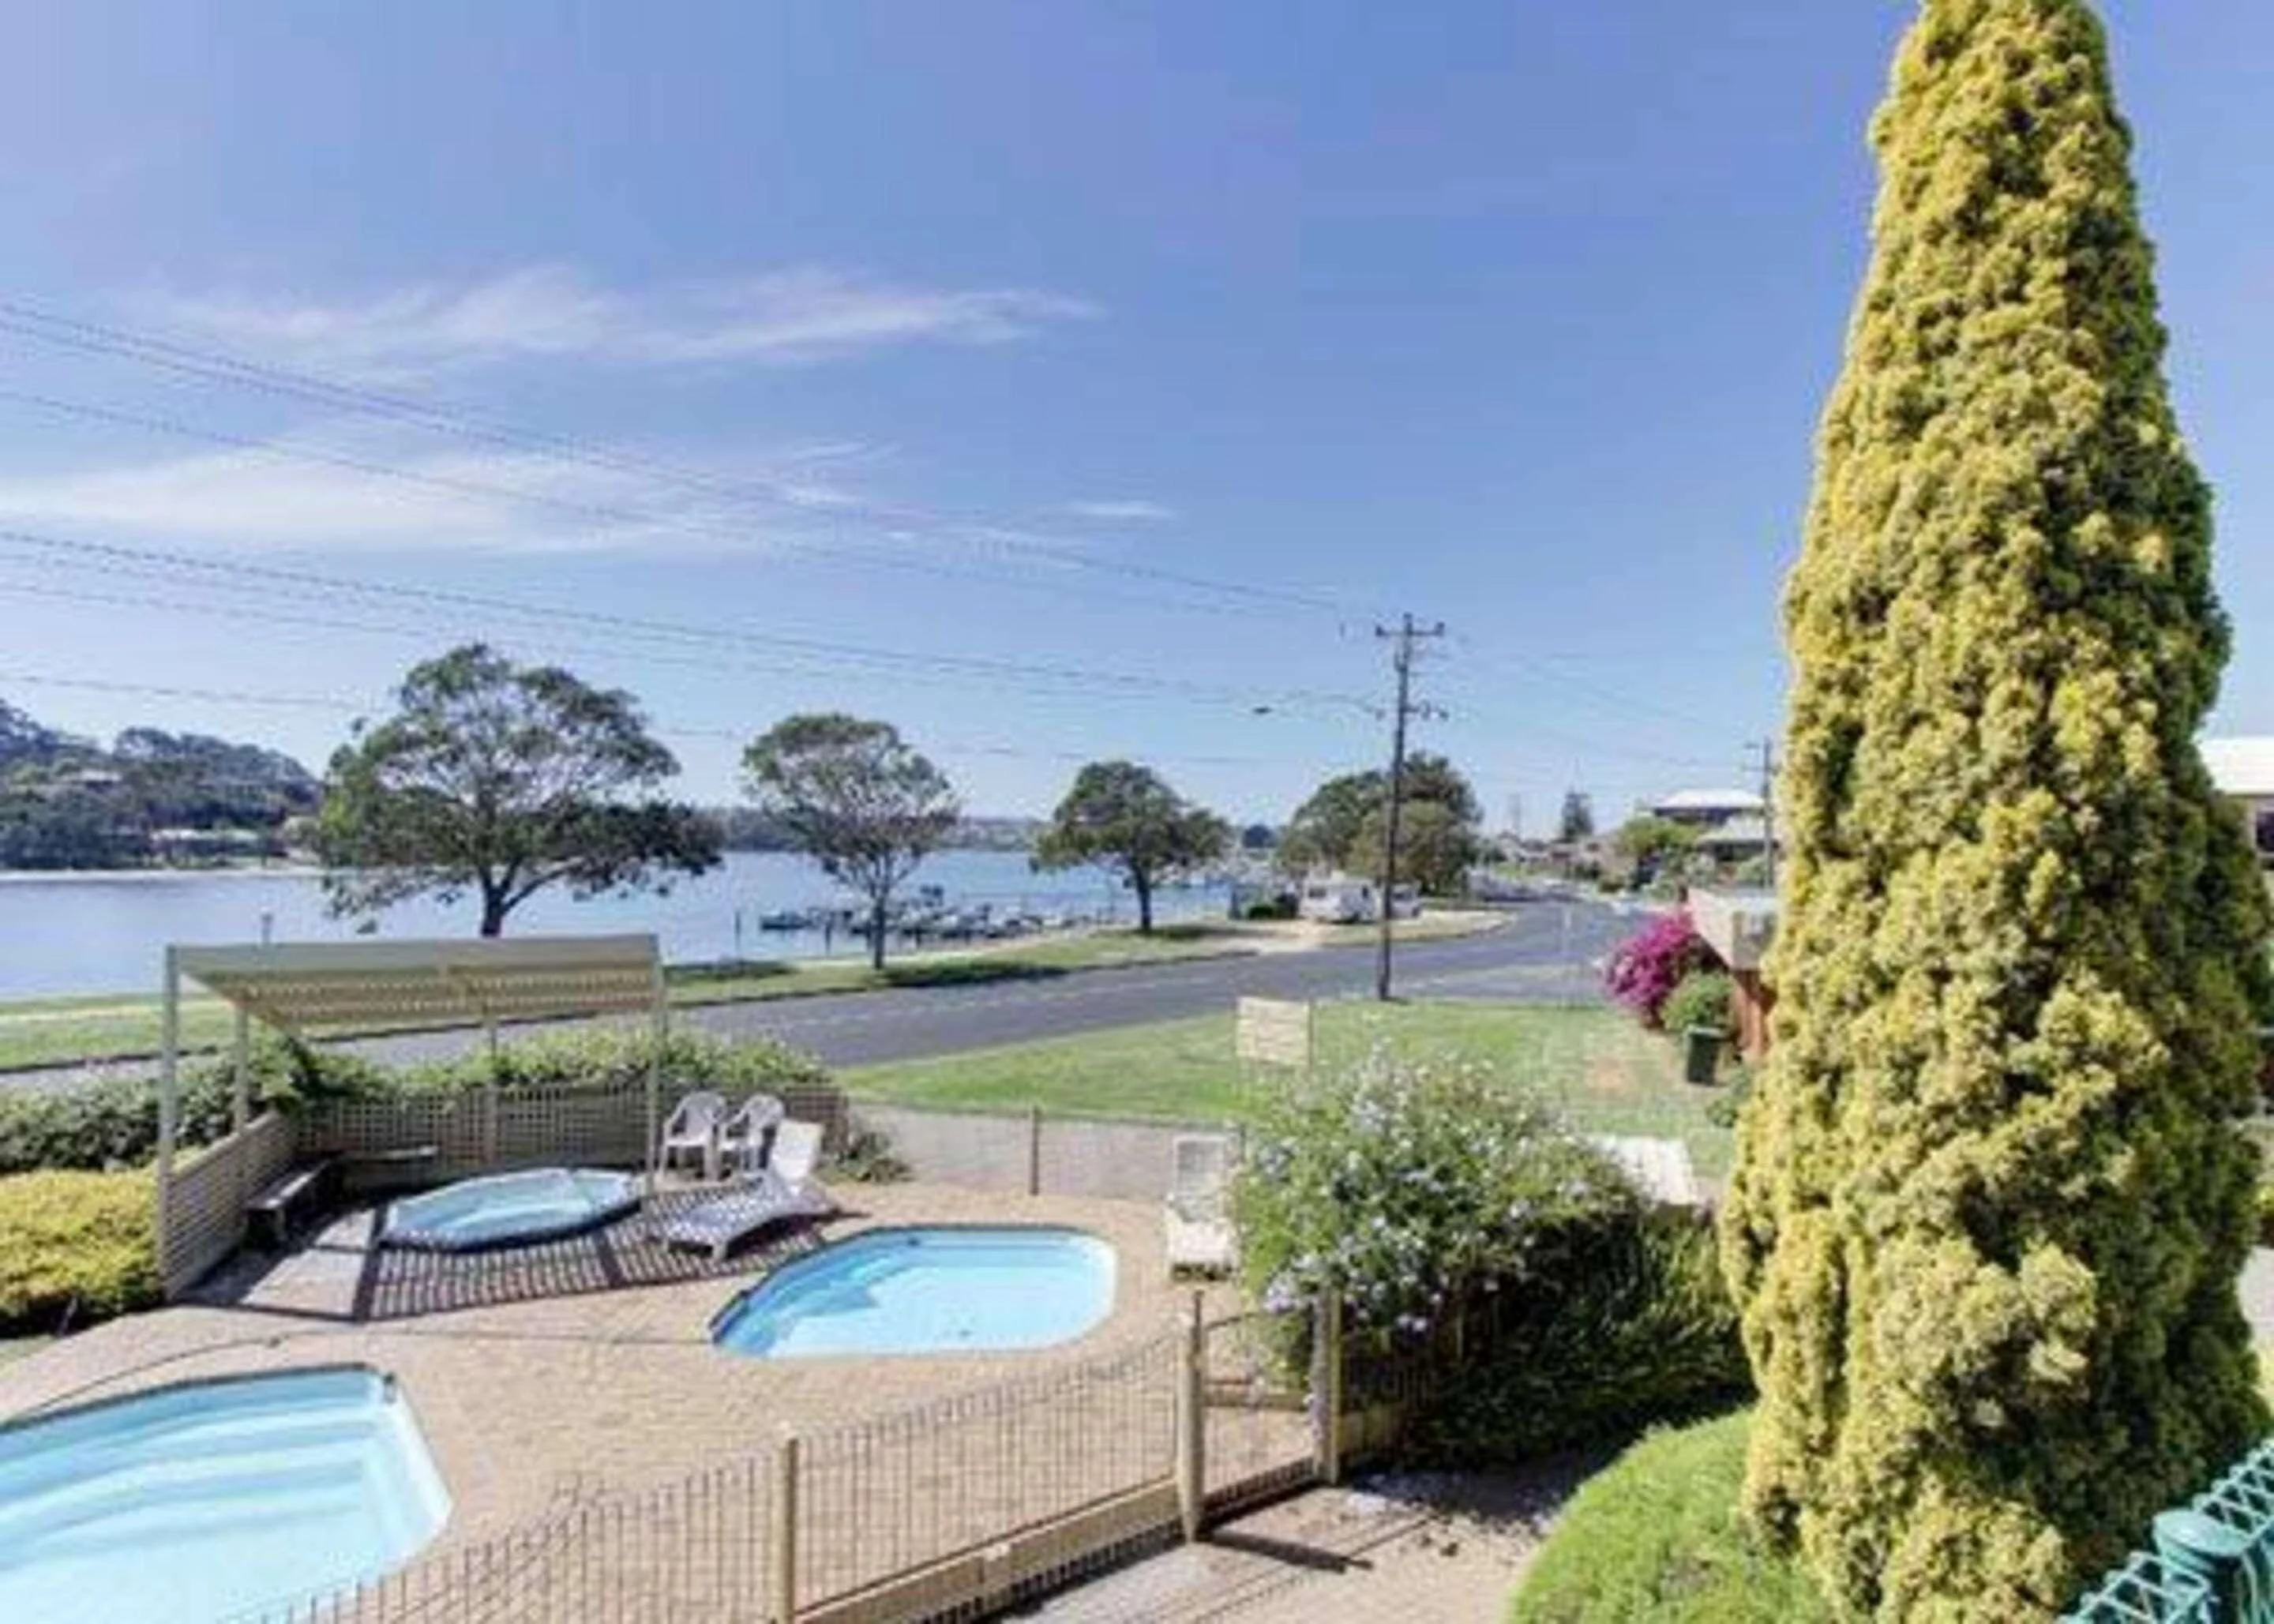 Photo of Comfort Inn and Suites Lakes Entrance property